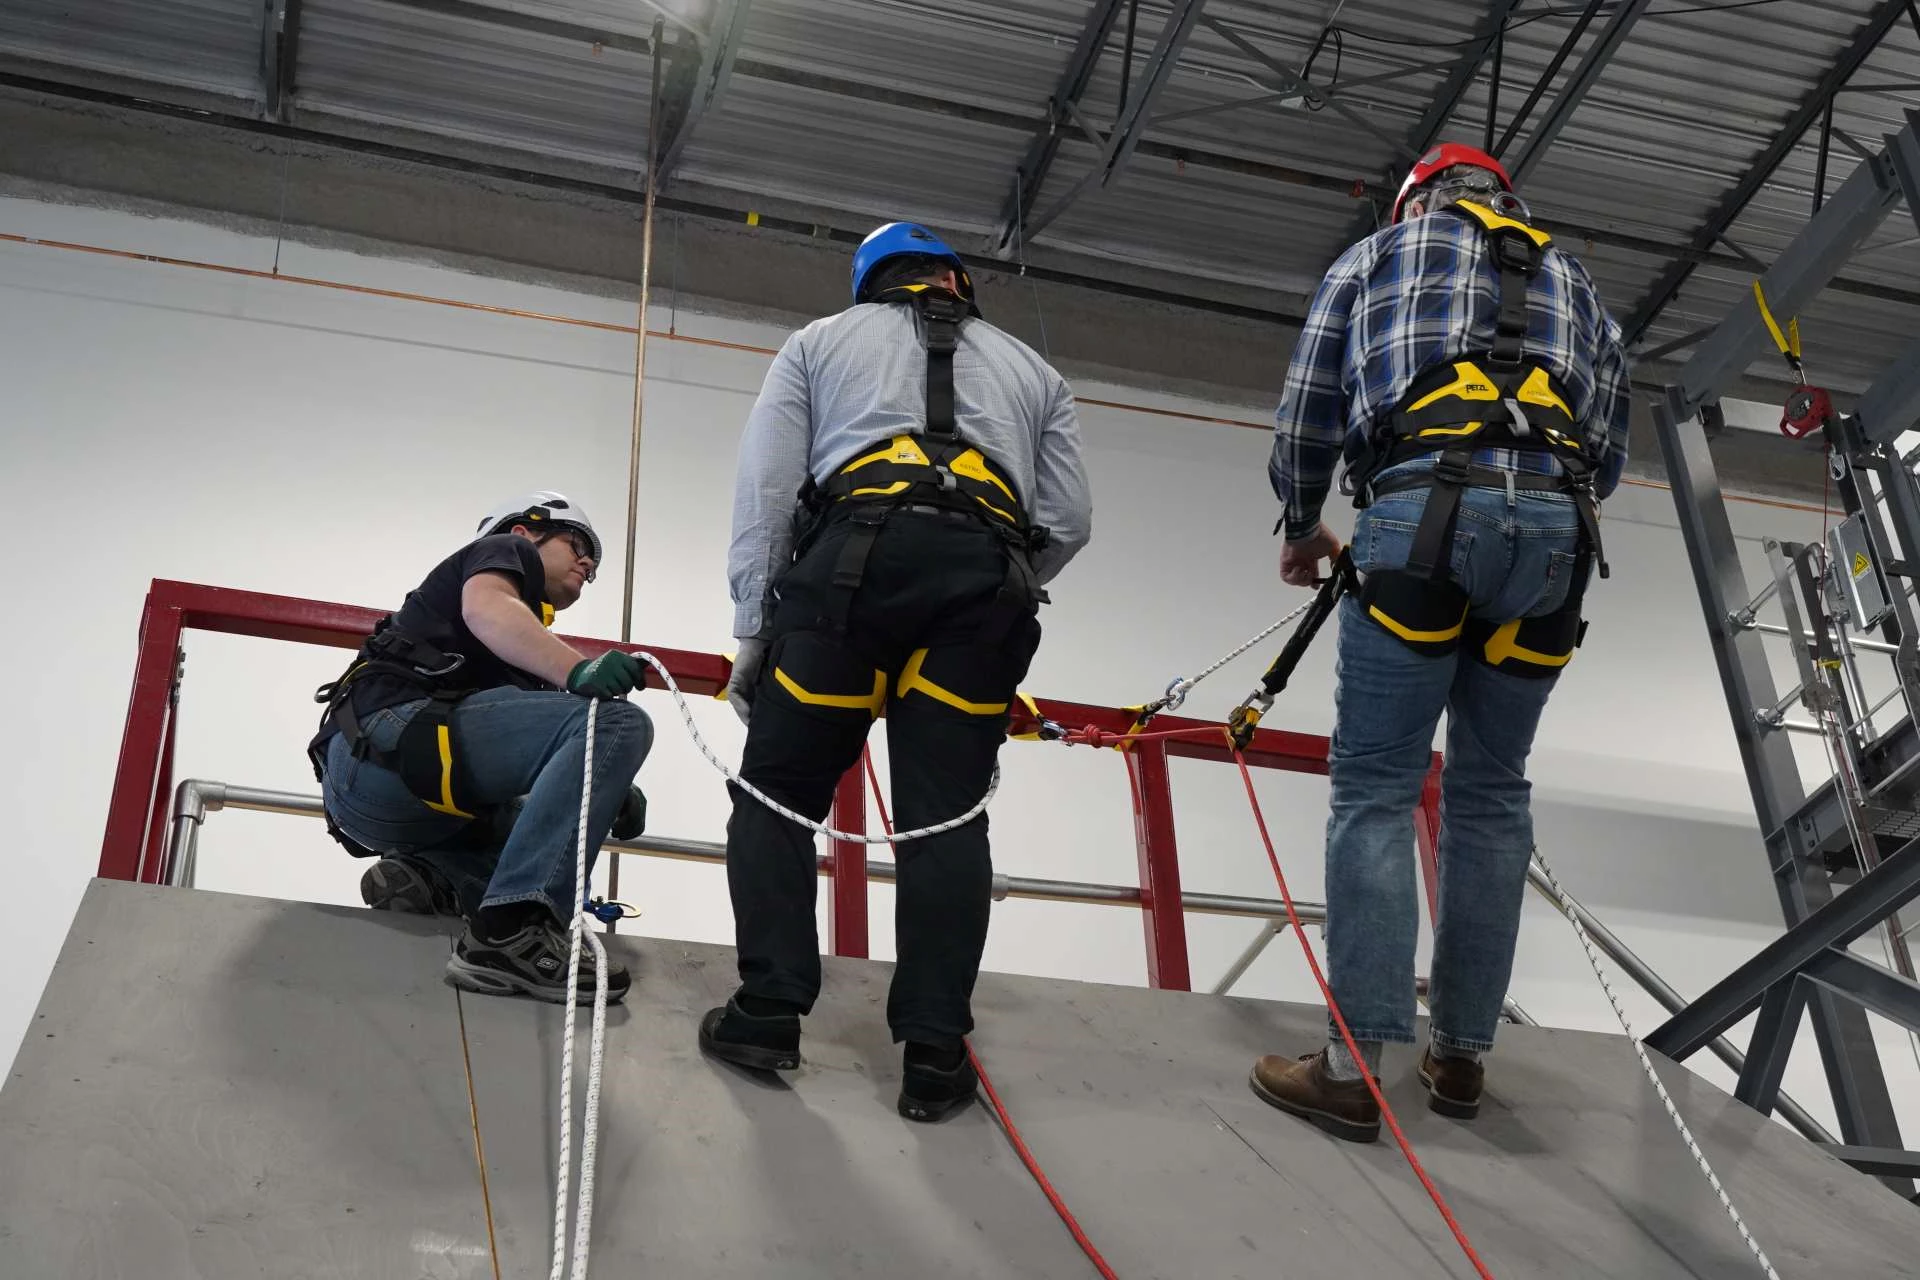 Rope Access Training / Working At heights Training / Fall Protection Training